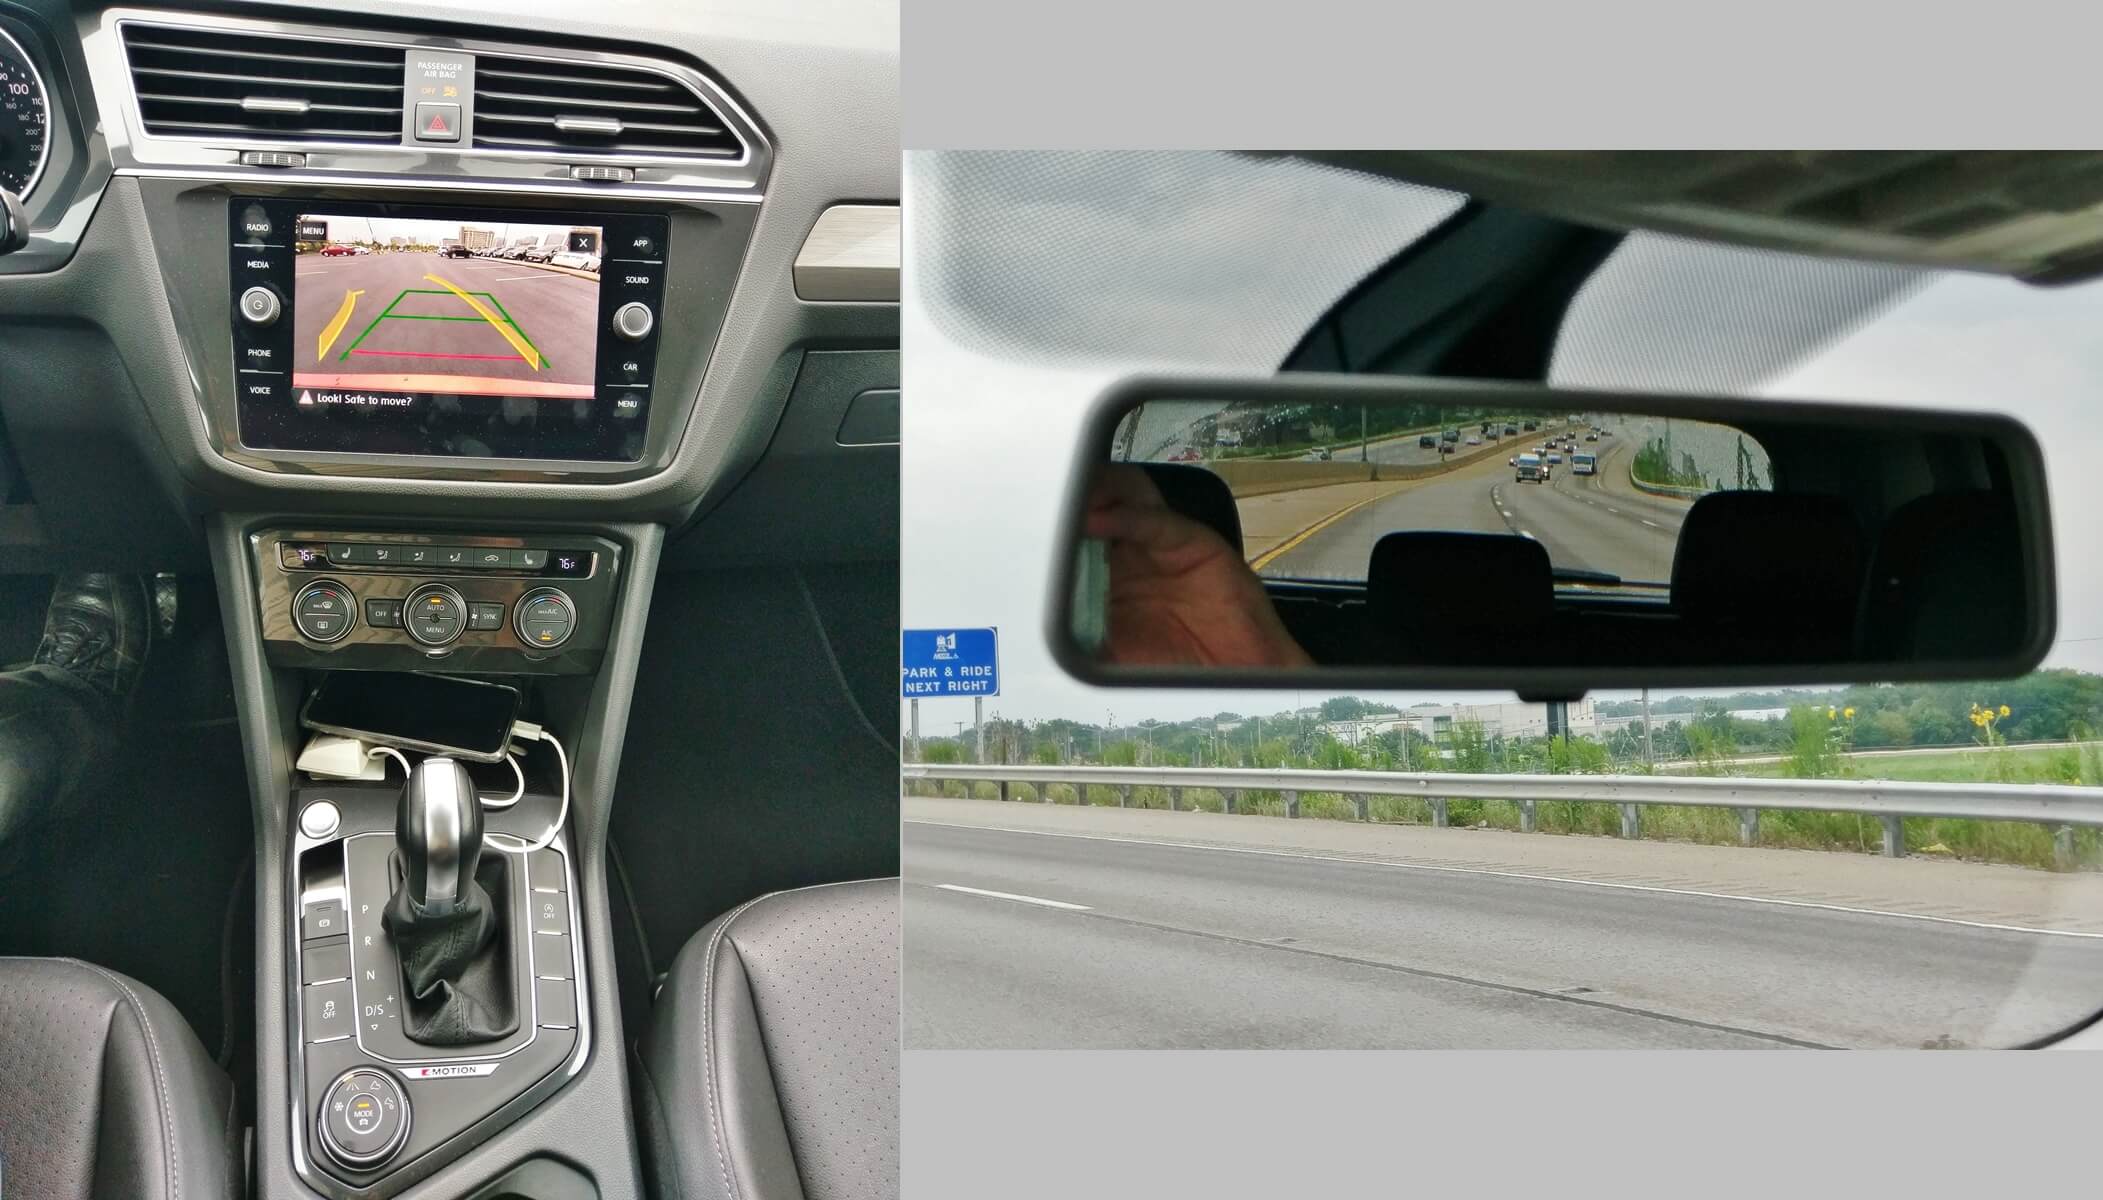 2018 Volkswagen Tiguan SE AWD: standard rear-view camera with park grid-lines; Large backlight for improved rear-wards visibility